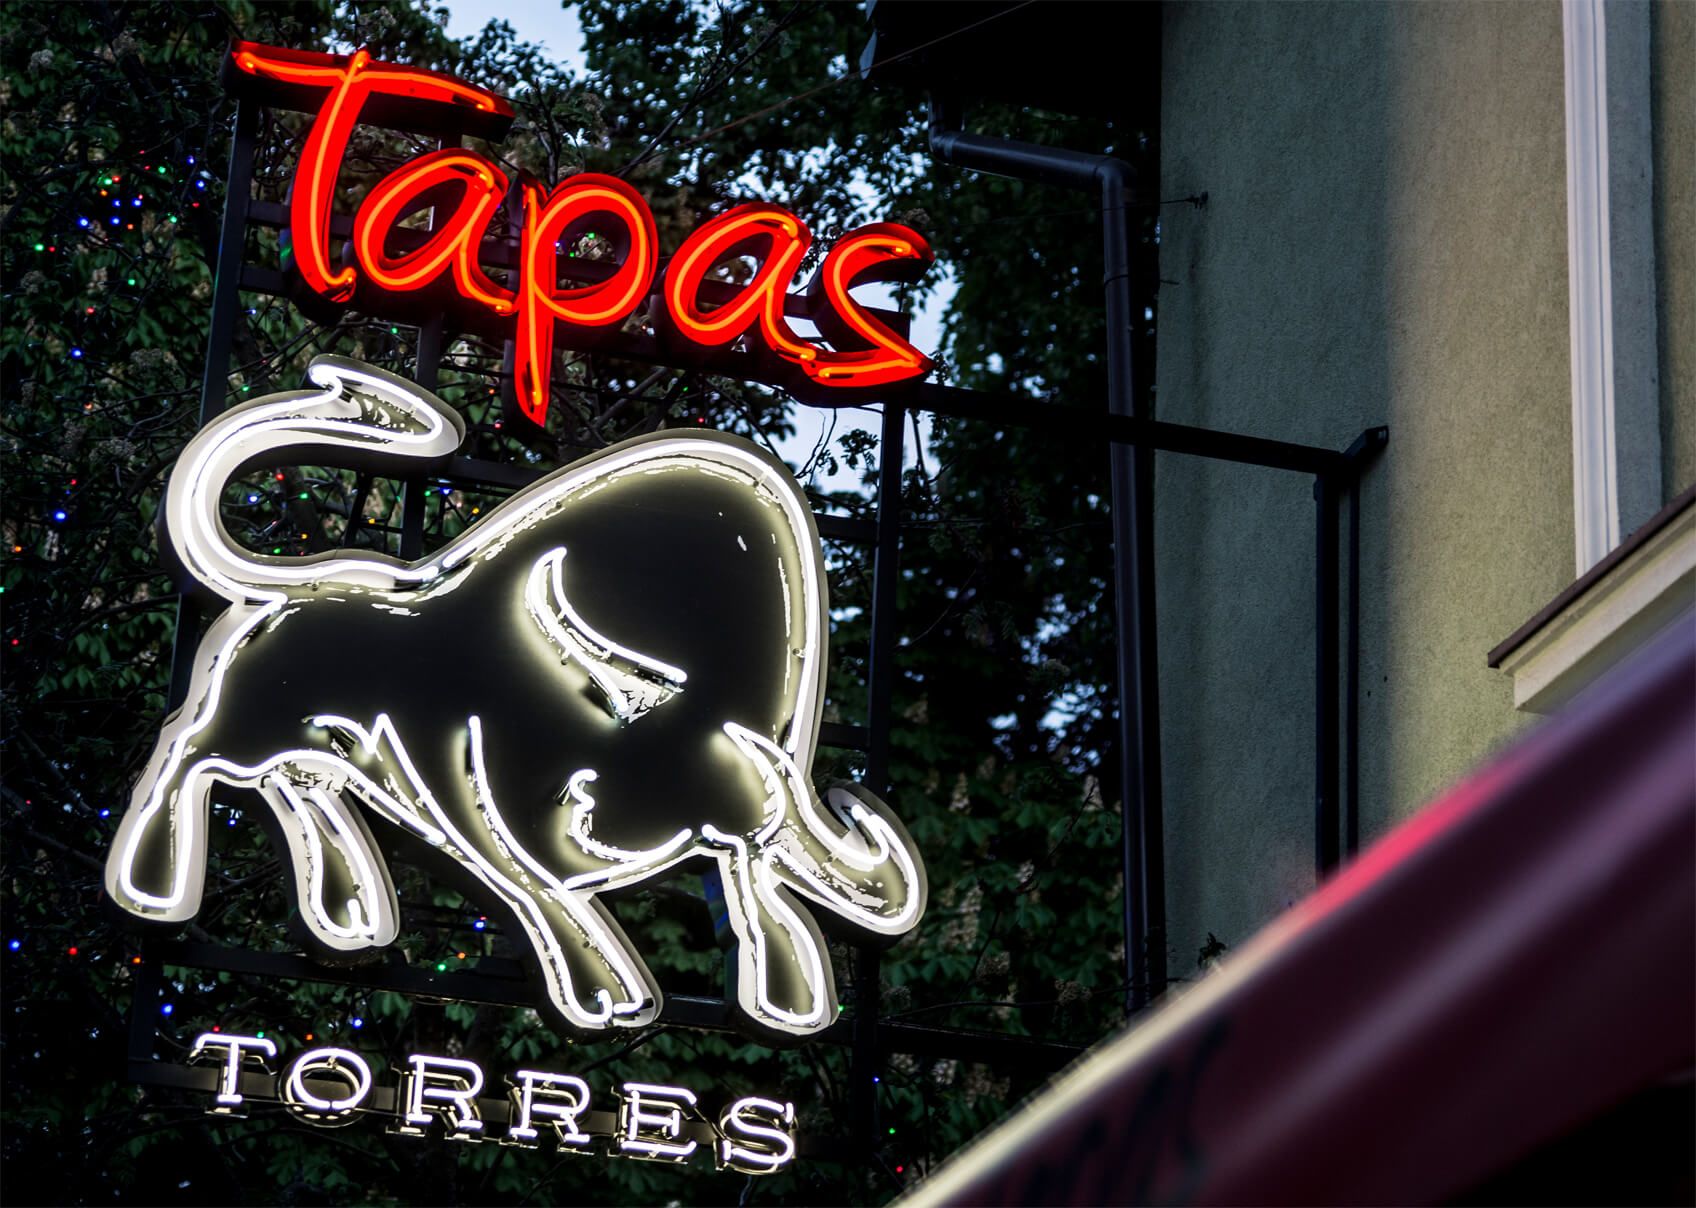 Tapas torres - neon-tapas-torres-byk-neon-above-entry-to-the-restaurant-neon-lighted-neon-spatial-neon-at-height-neon-on-a-pillar-logo-neon-sopot-spainese-restaurant